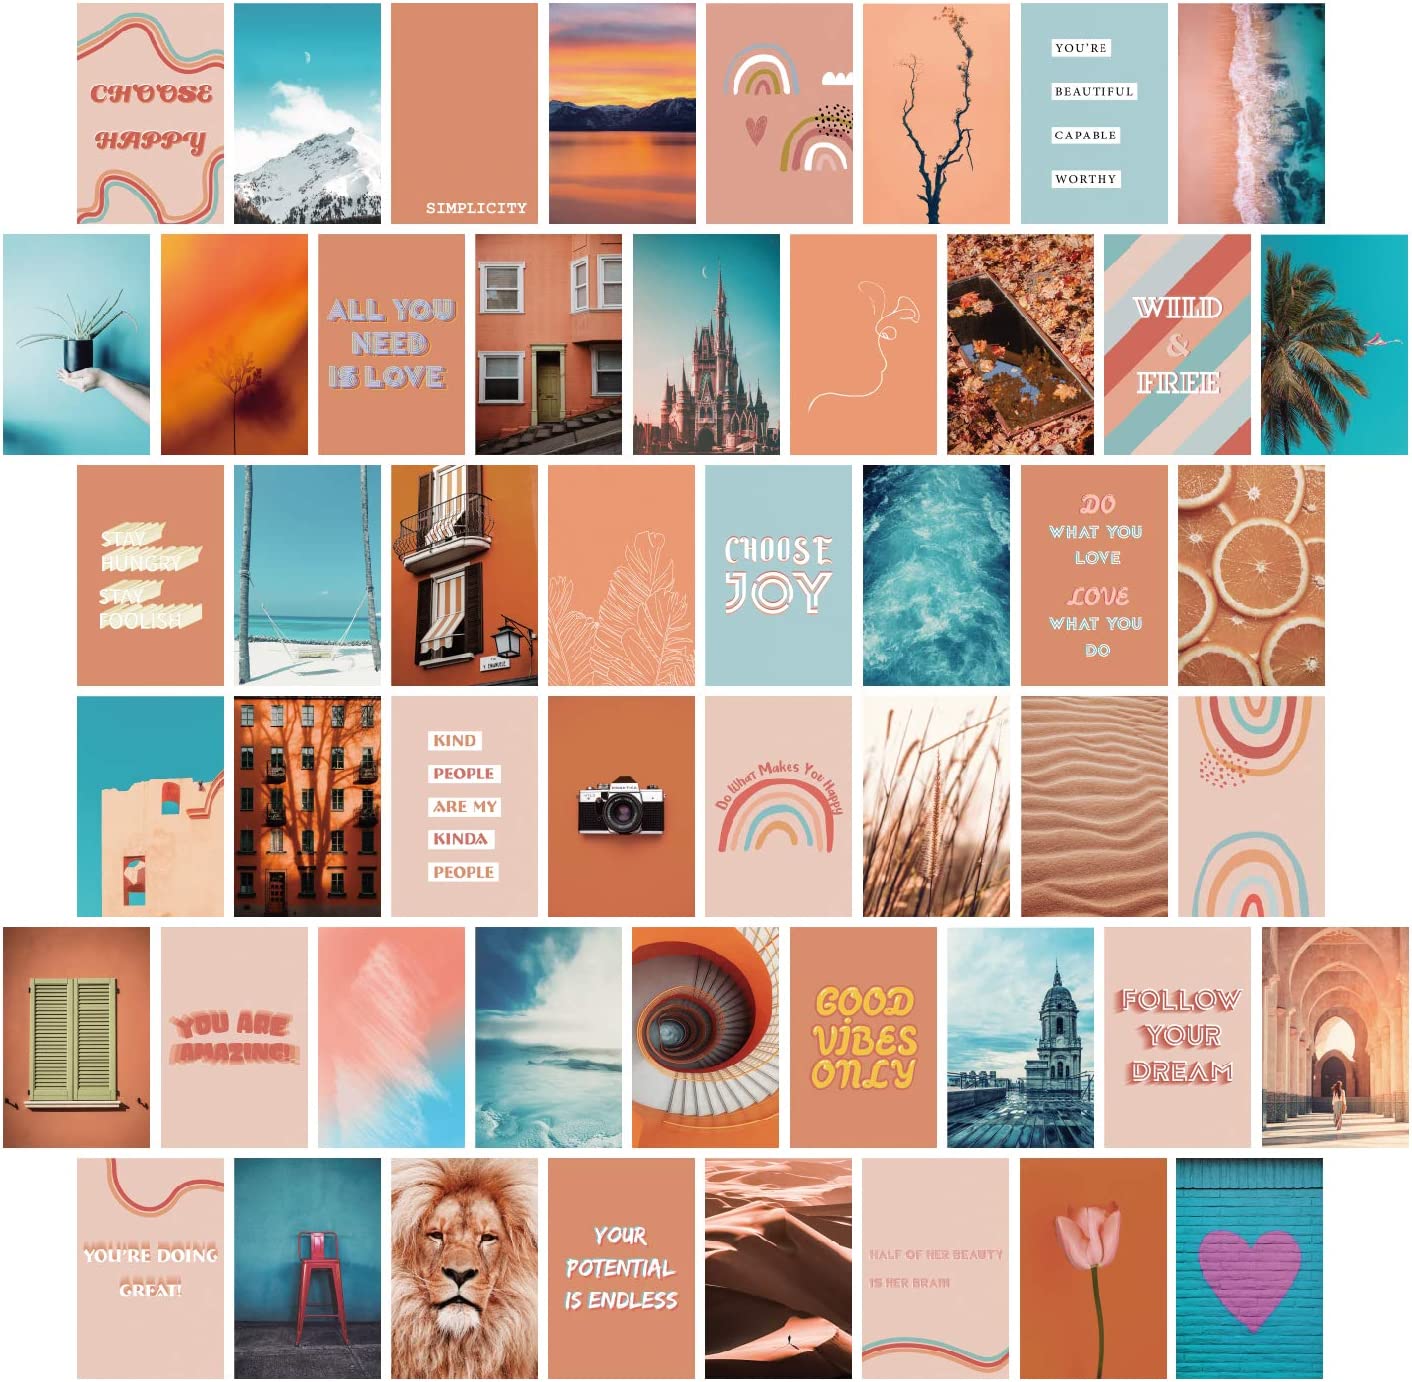 YUMKNOW Aesthetic Wall Collage Kit inch Set of Teen Girl Preppy Decor for Bedroom Dorm, Motivational Wall Art, Peach Teal Blue Photo Picture Posters, Inspirational Gift for Teenage